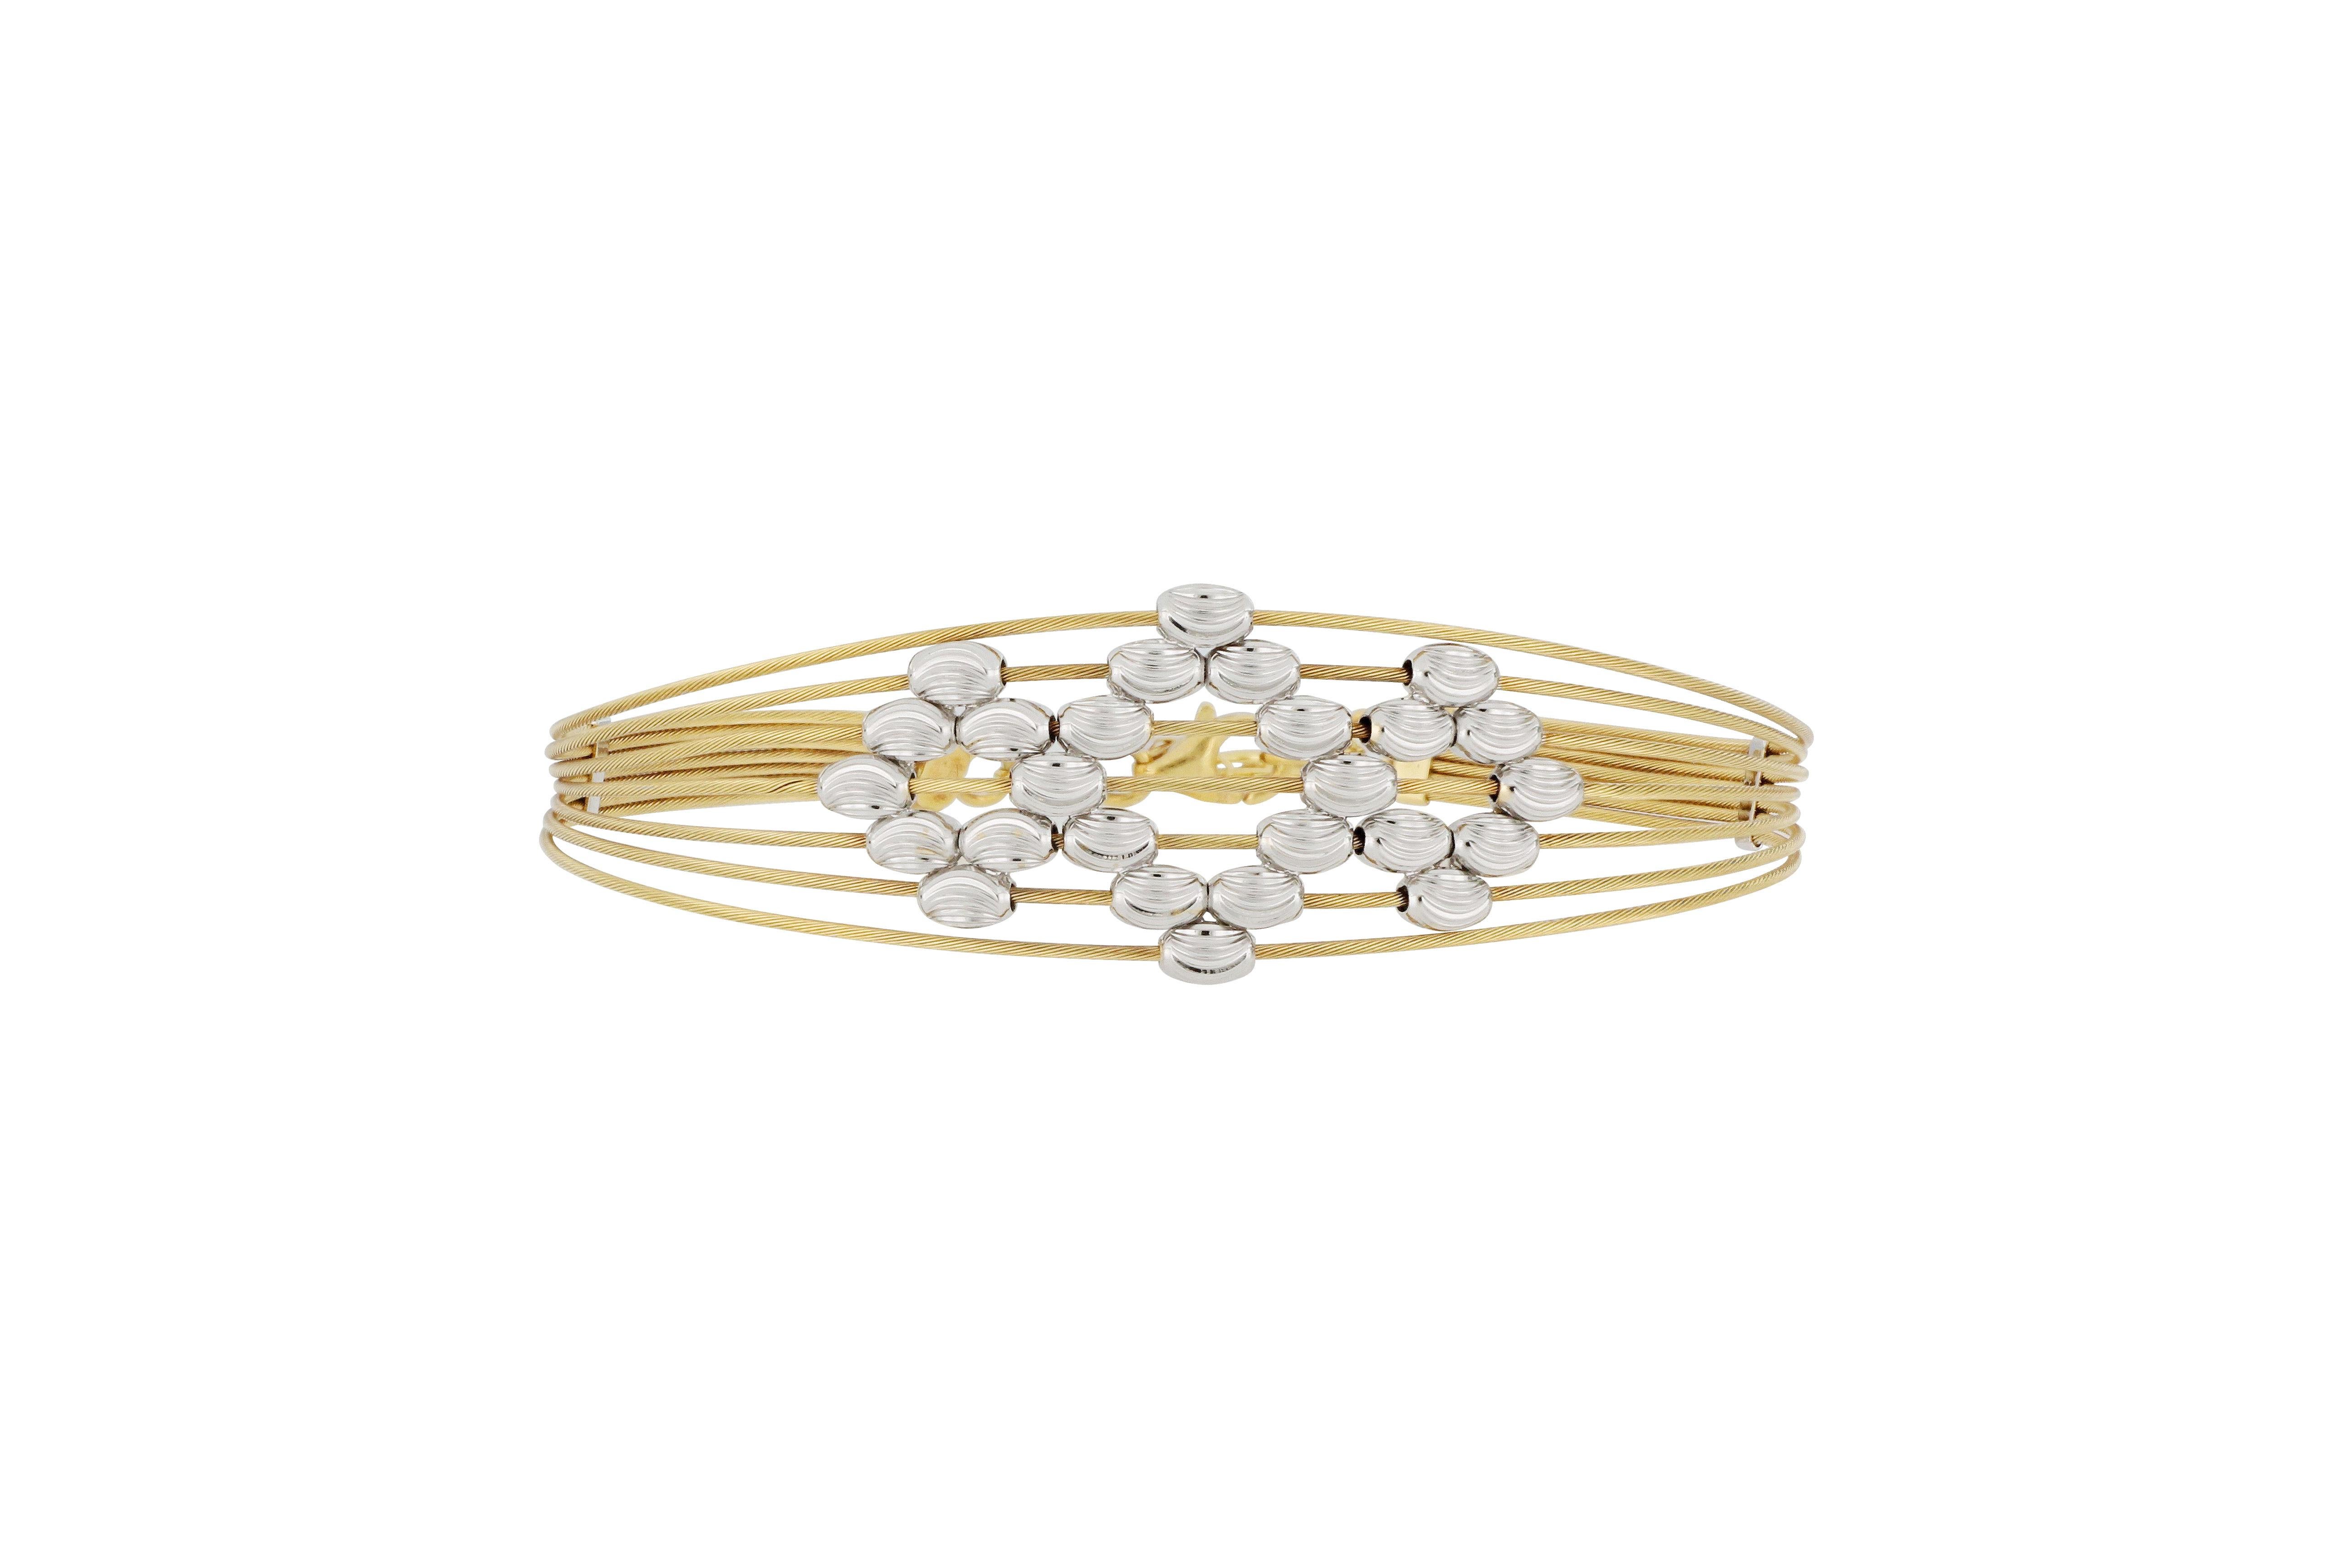 This beautiful piece of 18K yellow gold jewellery, designed and made in Italy, is composed of white gold cut beads stitched into a sparkling bangle, it is causal and  very stylish, suitable for everyday wear.
The company was founded one and a half